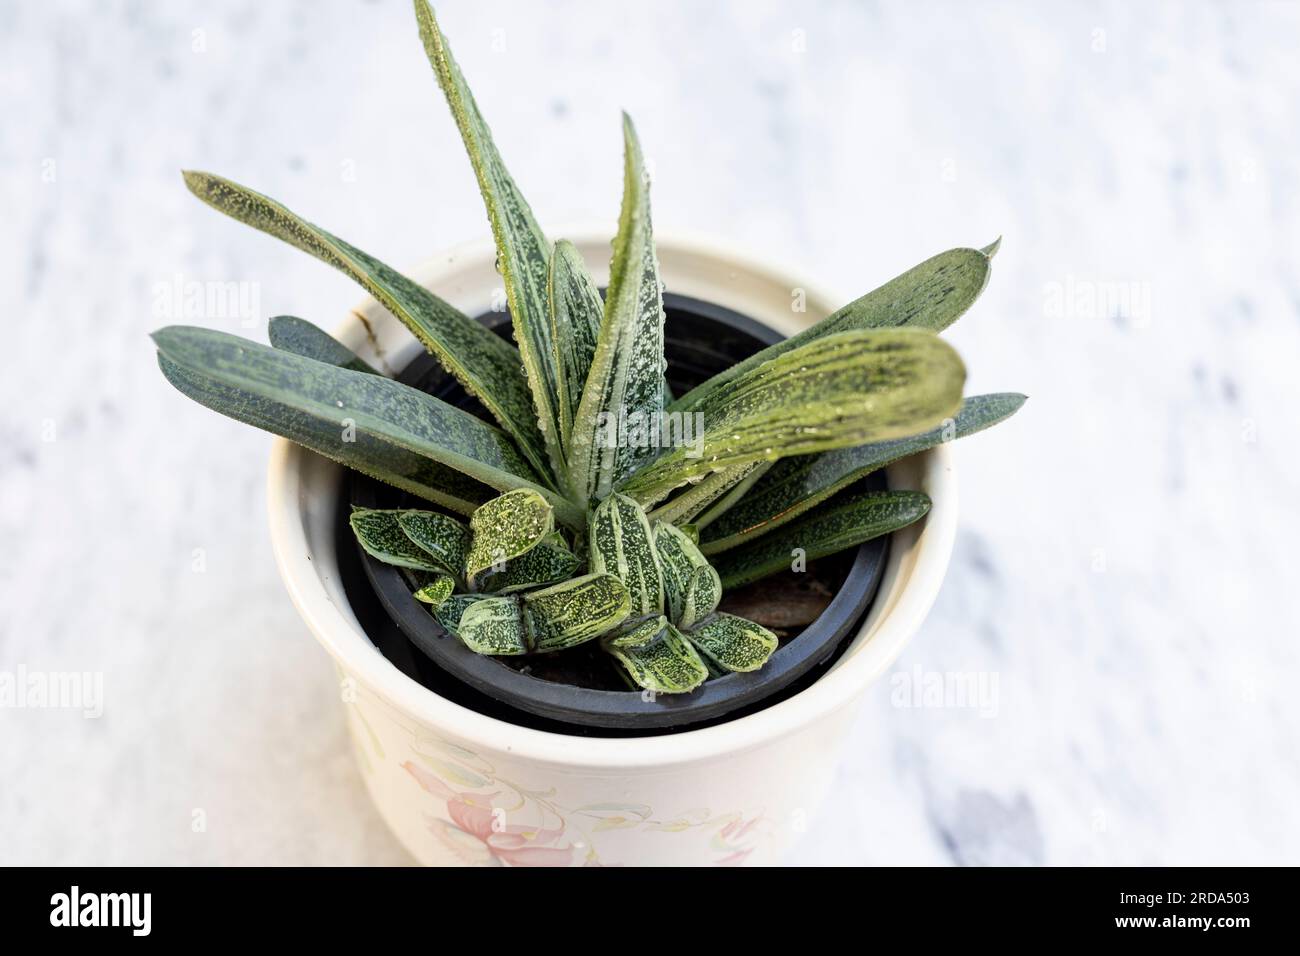 Gasteria ox tongue succulent plant top view Stock Photo